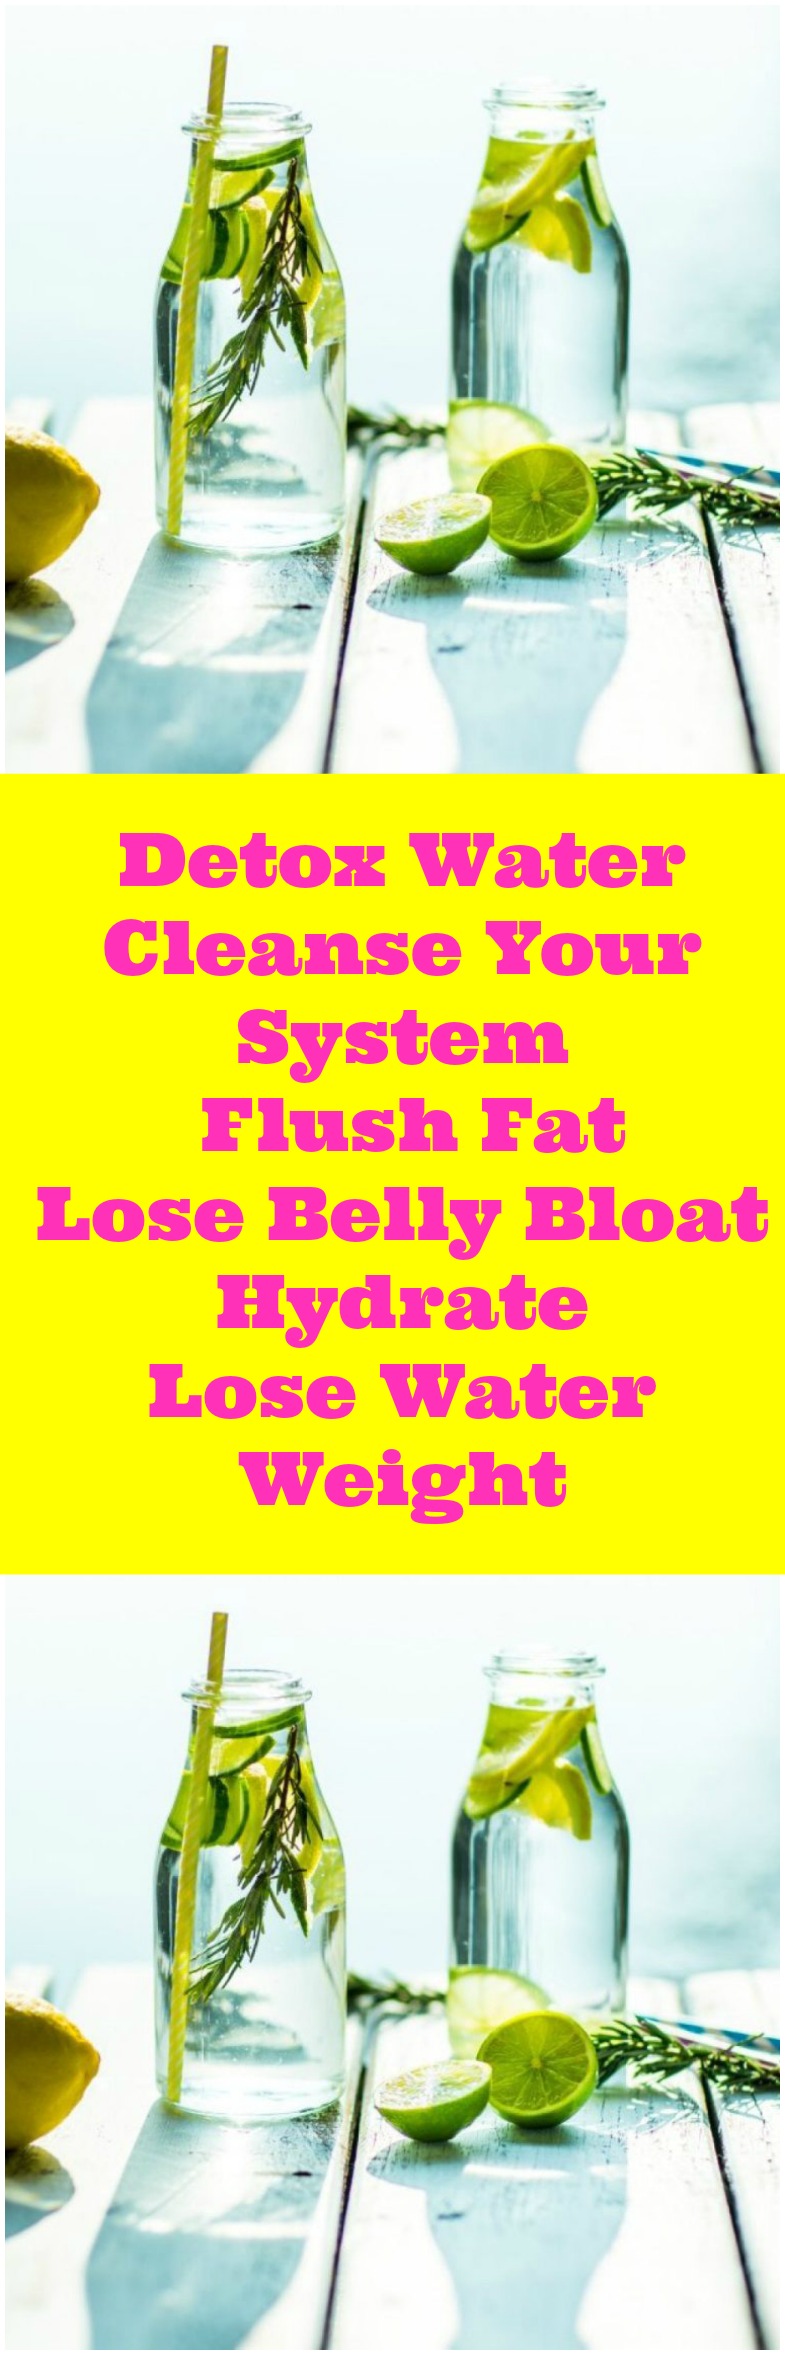 Drink Detox Water to flush toxins from your body, cleanse your system for weight loss, lose belly bloat and feel more energized.